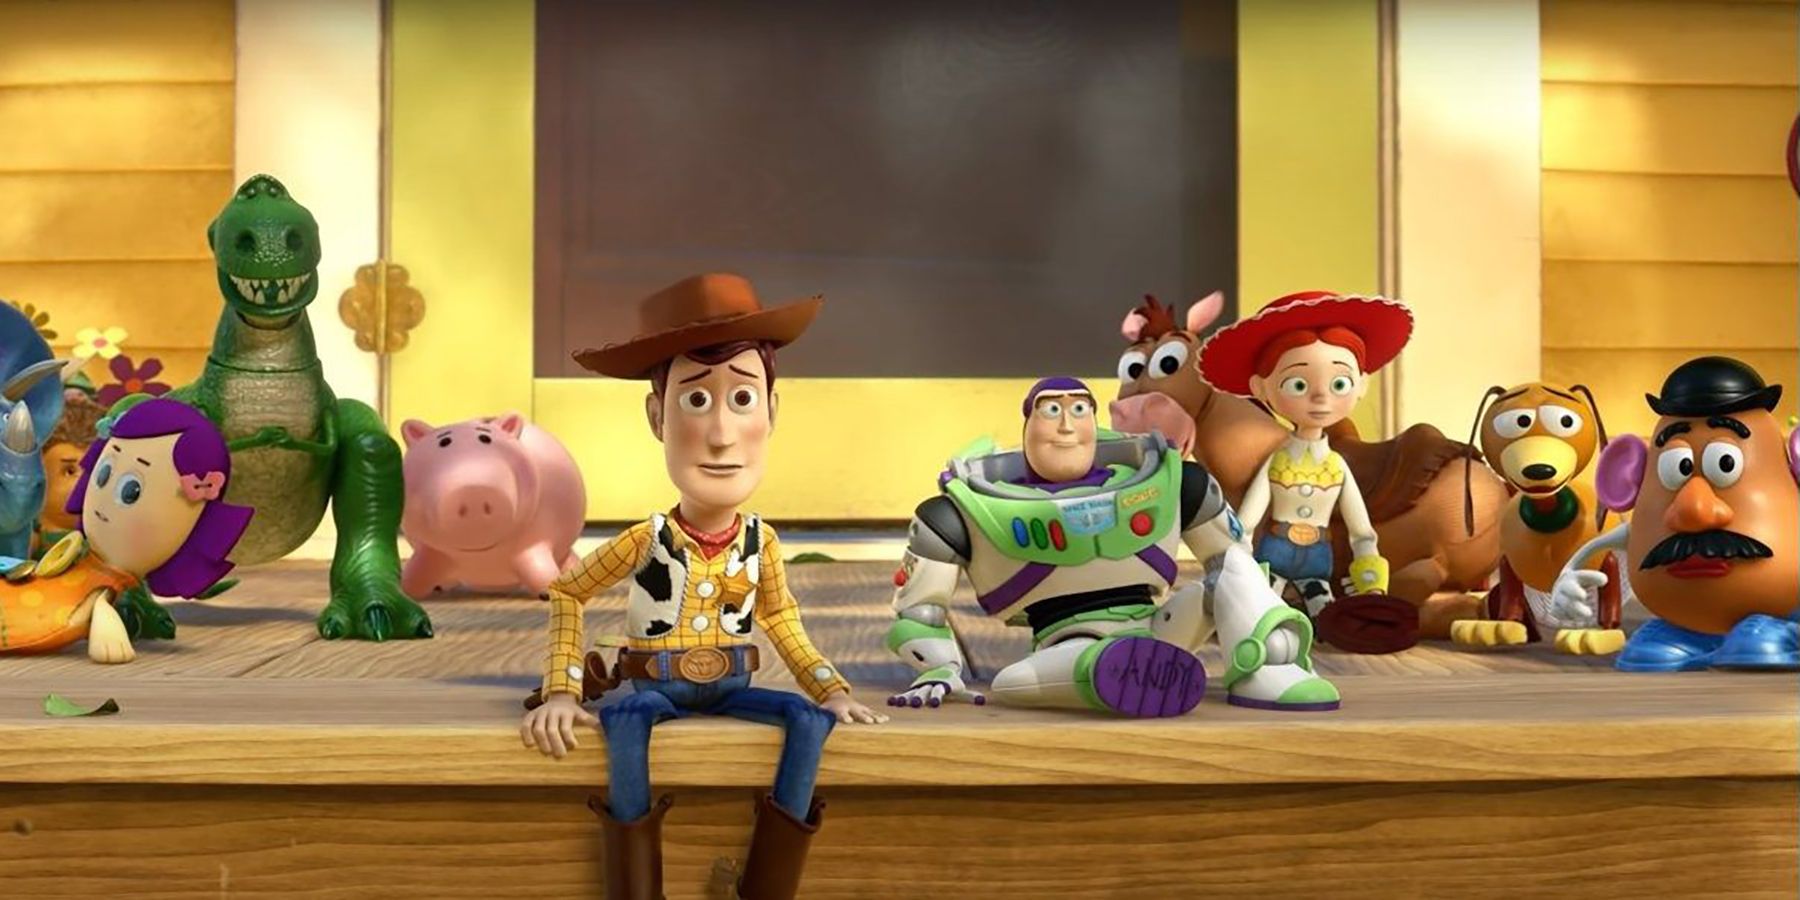 Toy Story 3: Bonnie Actor Didn't Know Andy Was Giving Toys Away